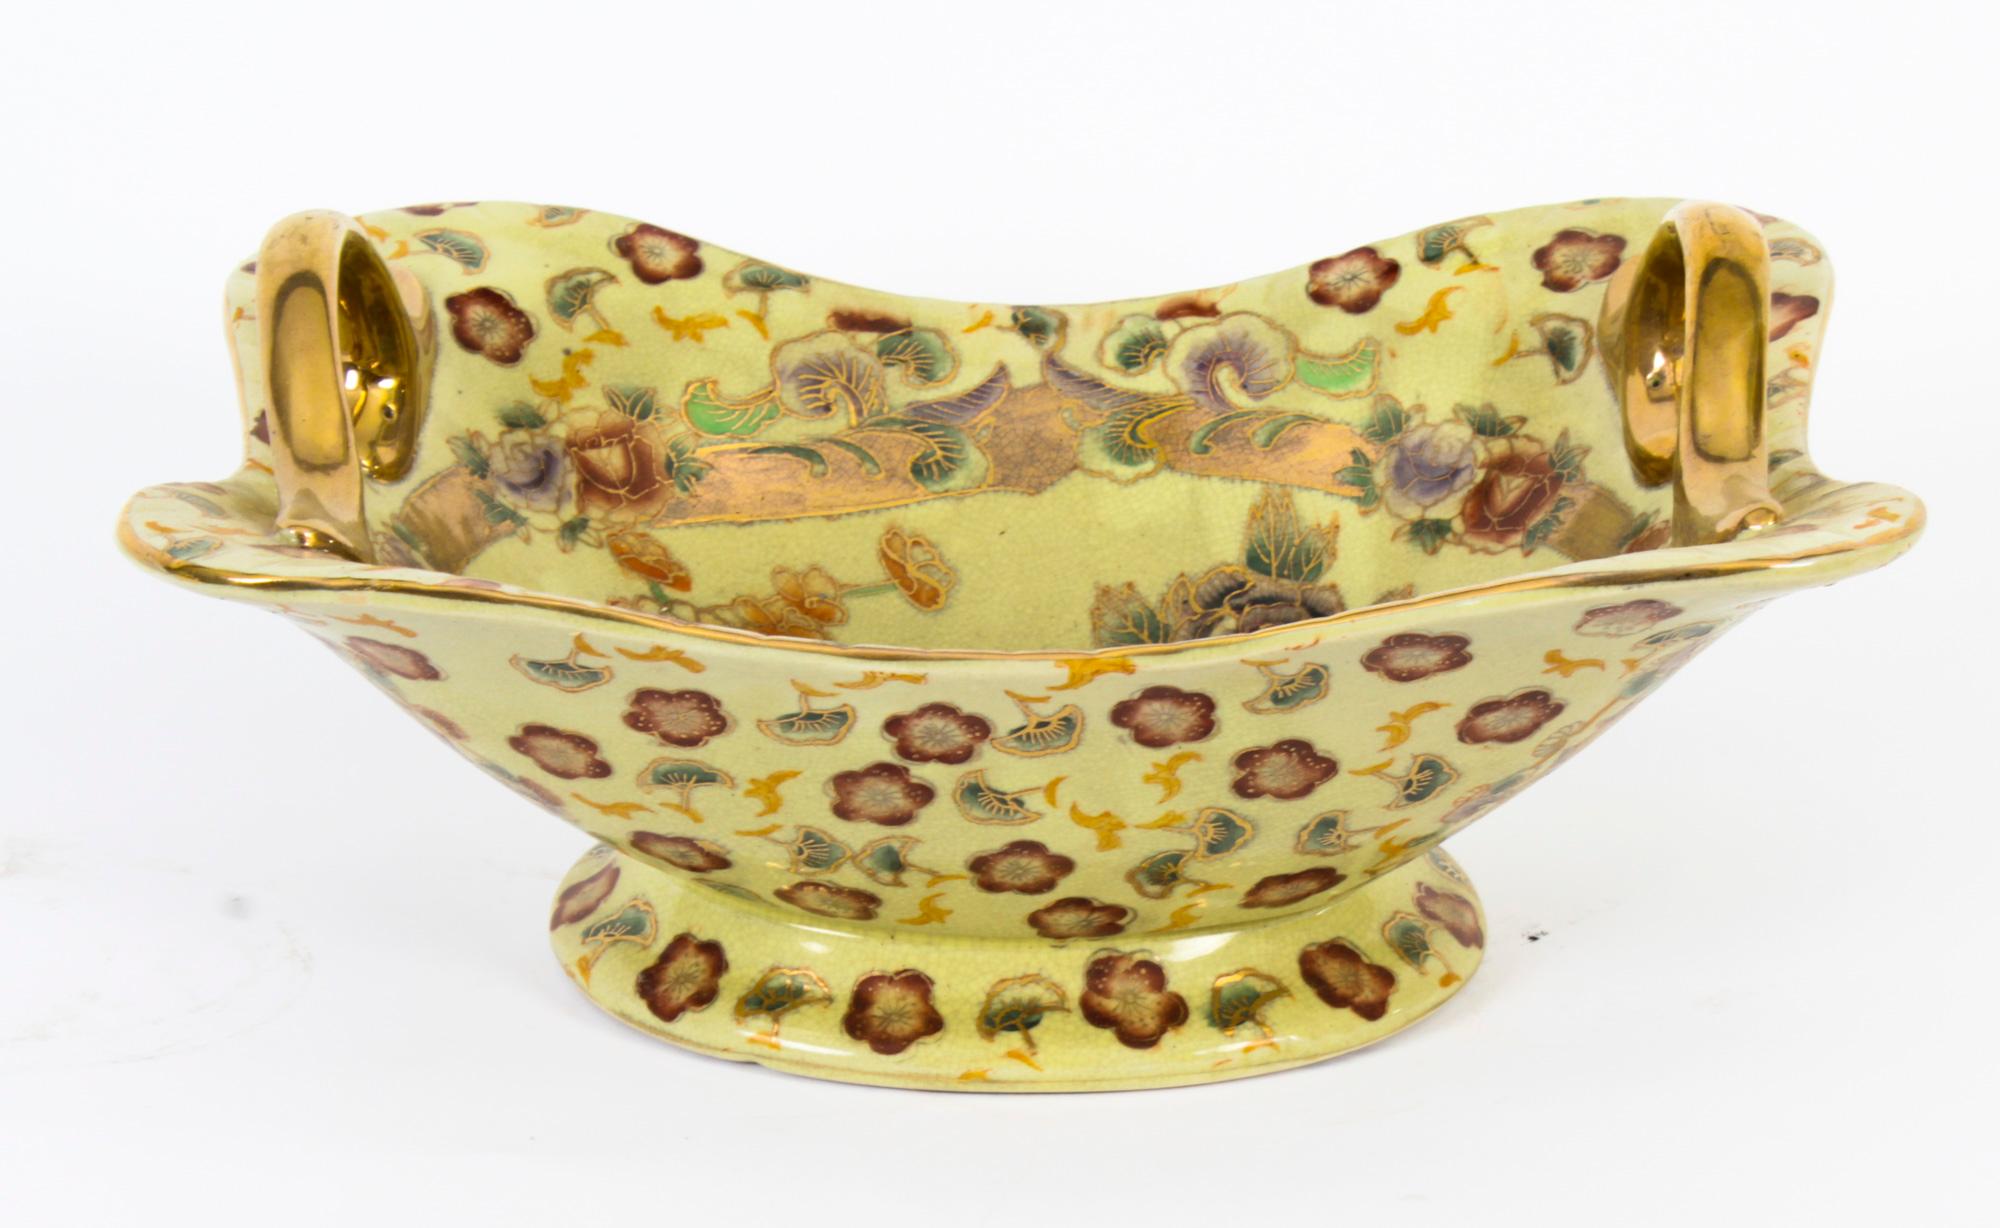 Vintage Chinese Porcelain Bowl, Mid-20th Century For Sale 2